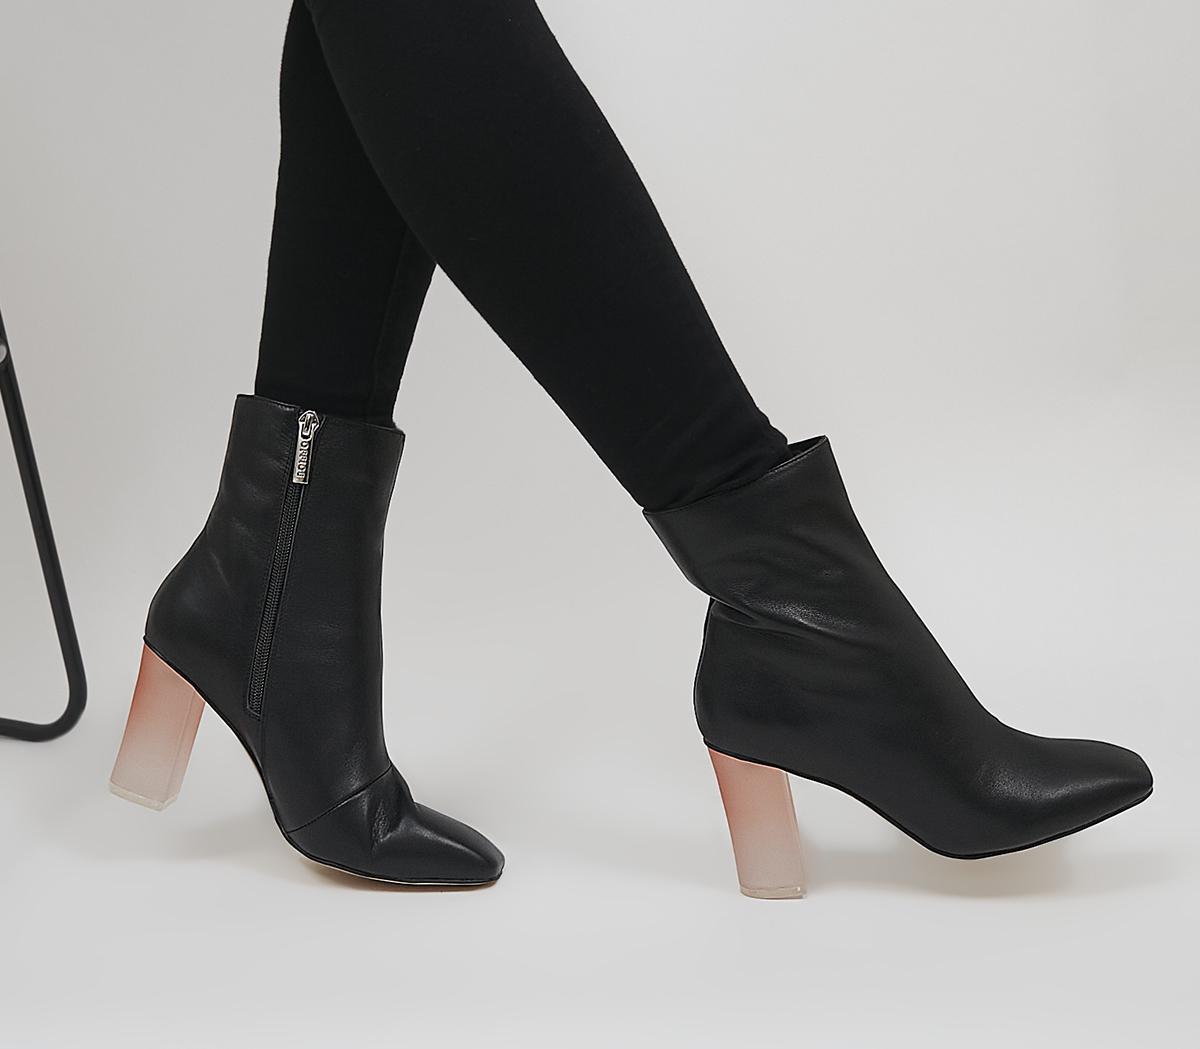 Around Feature Block Heeled Ankle Boots Black Leather